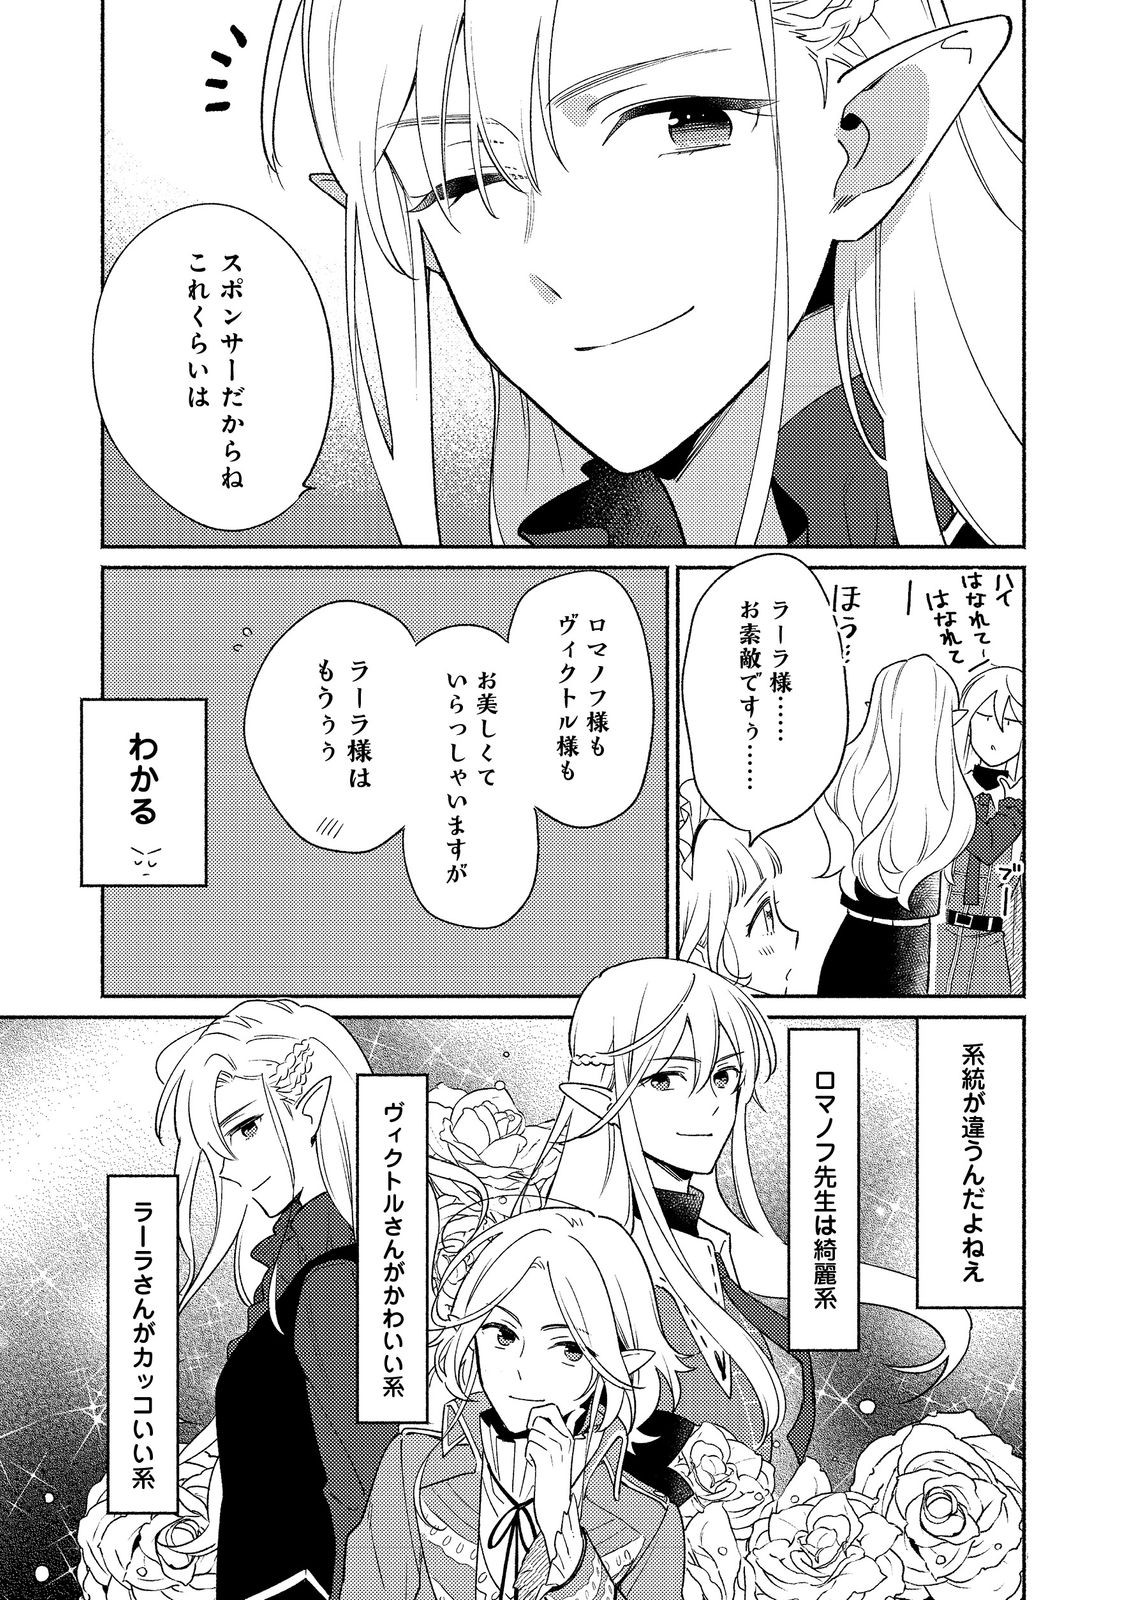 I’m the White Pig Nobleman 第21.1話 - Page 13